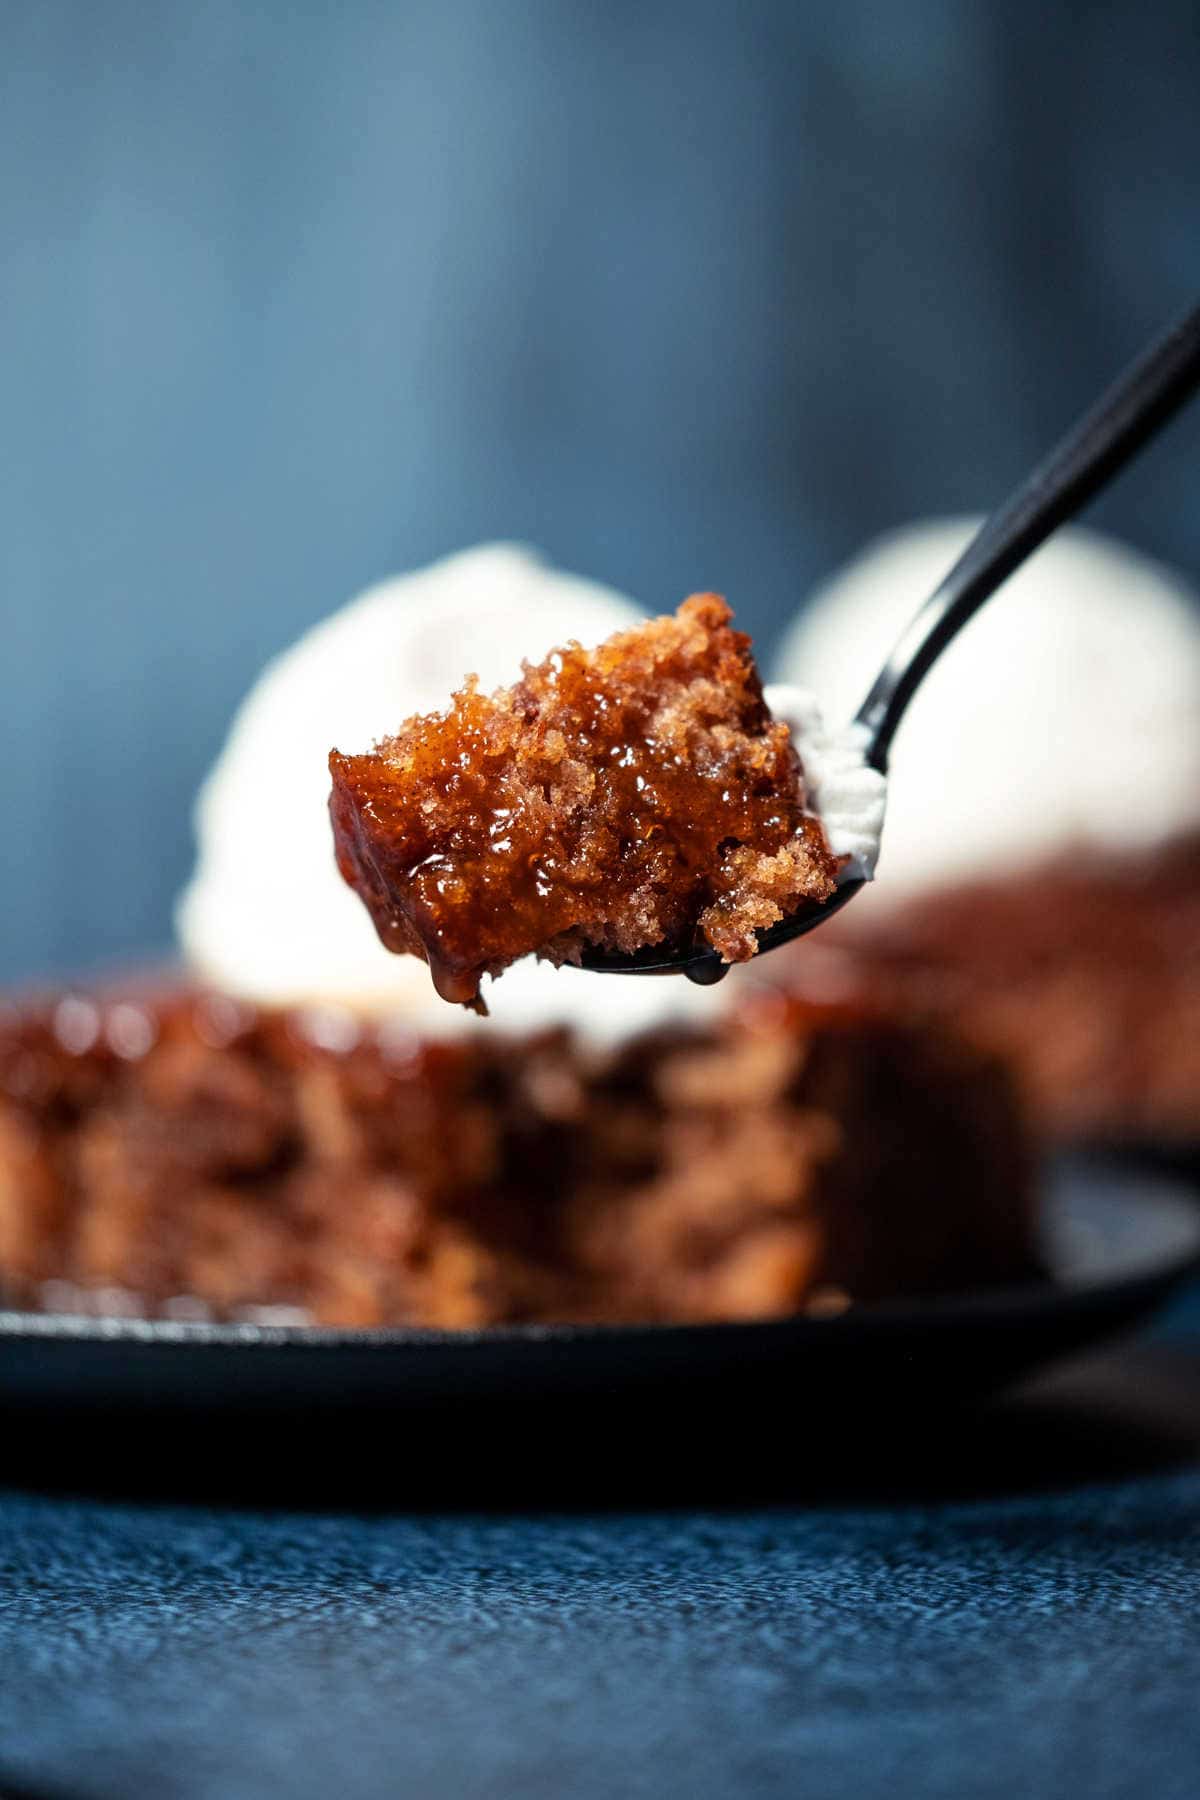 Forkful of vegan sticky toffee pudding.